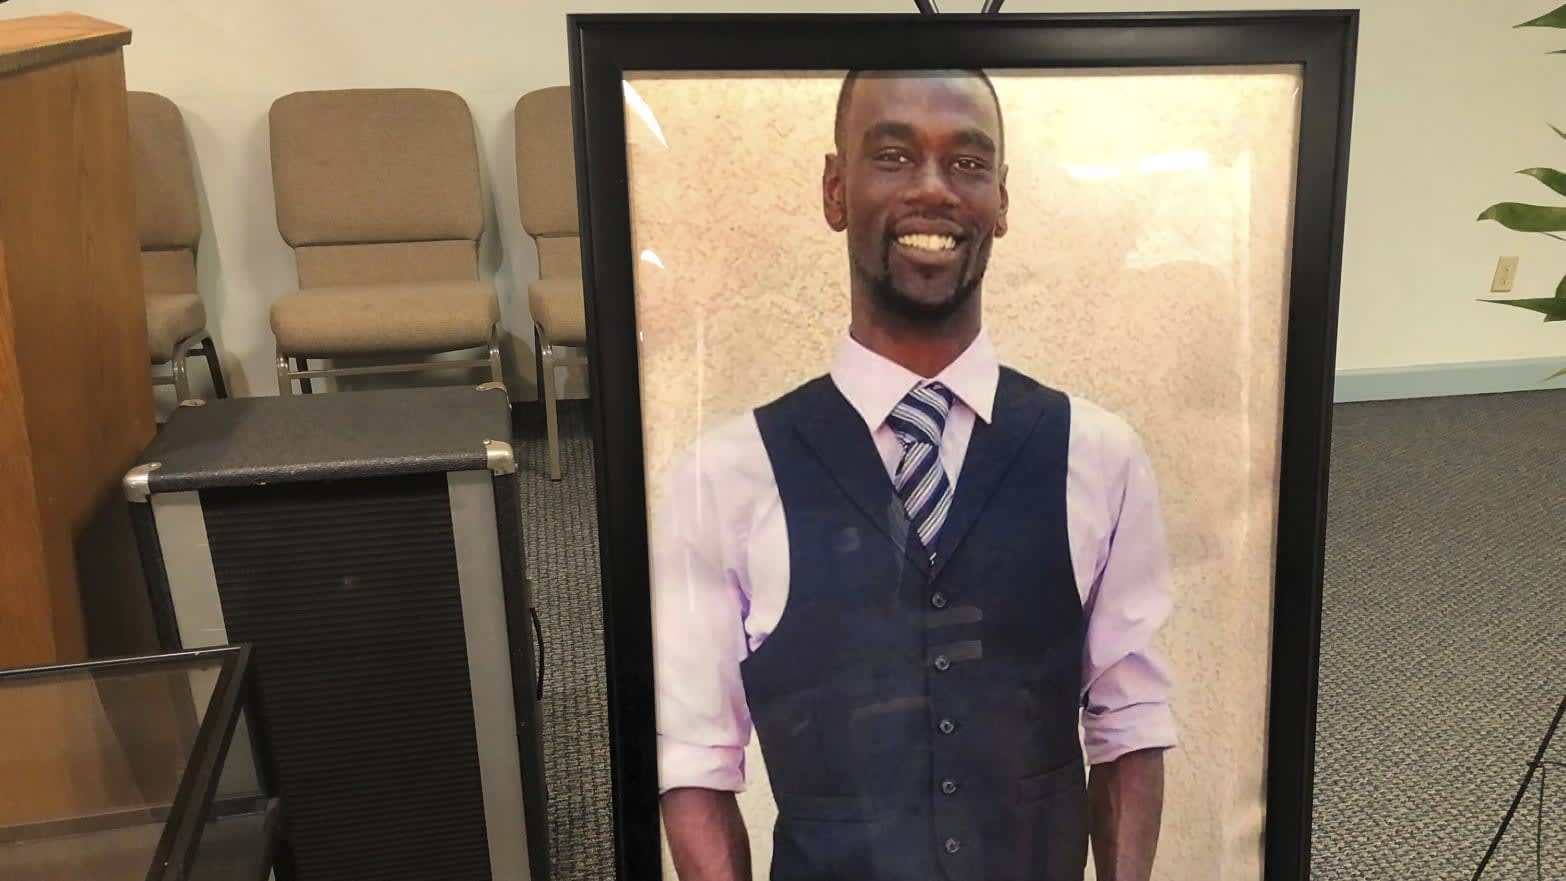 A framed photo of Tyre Nichols